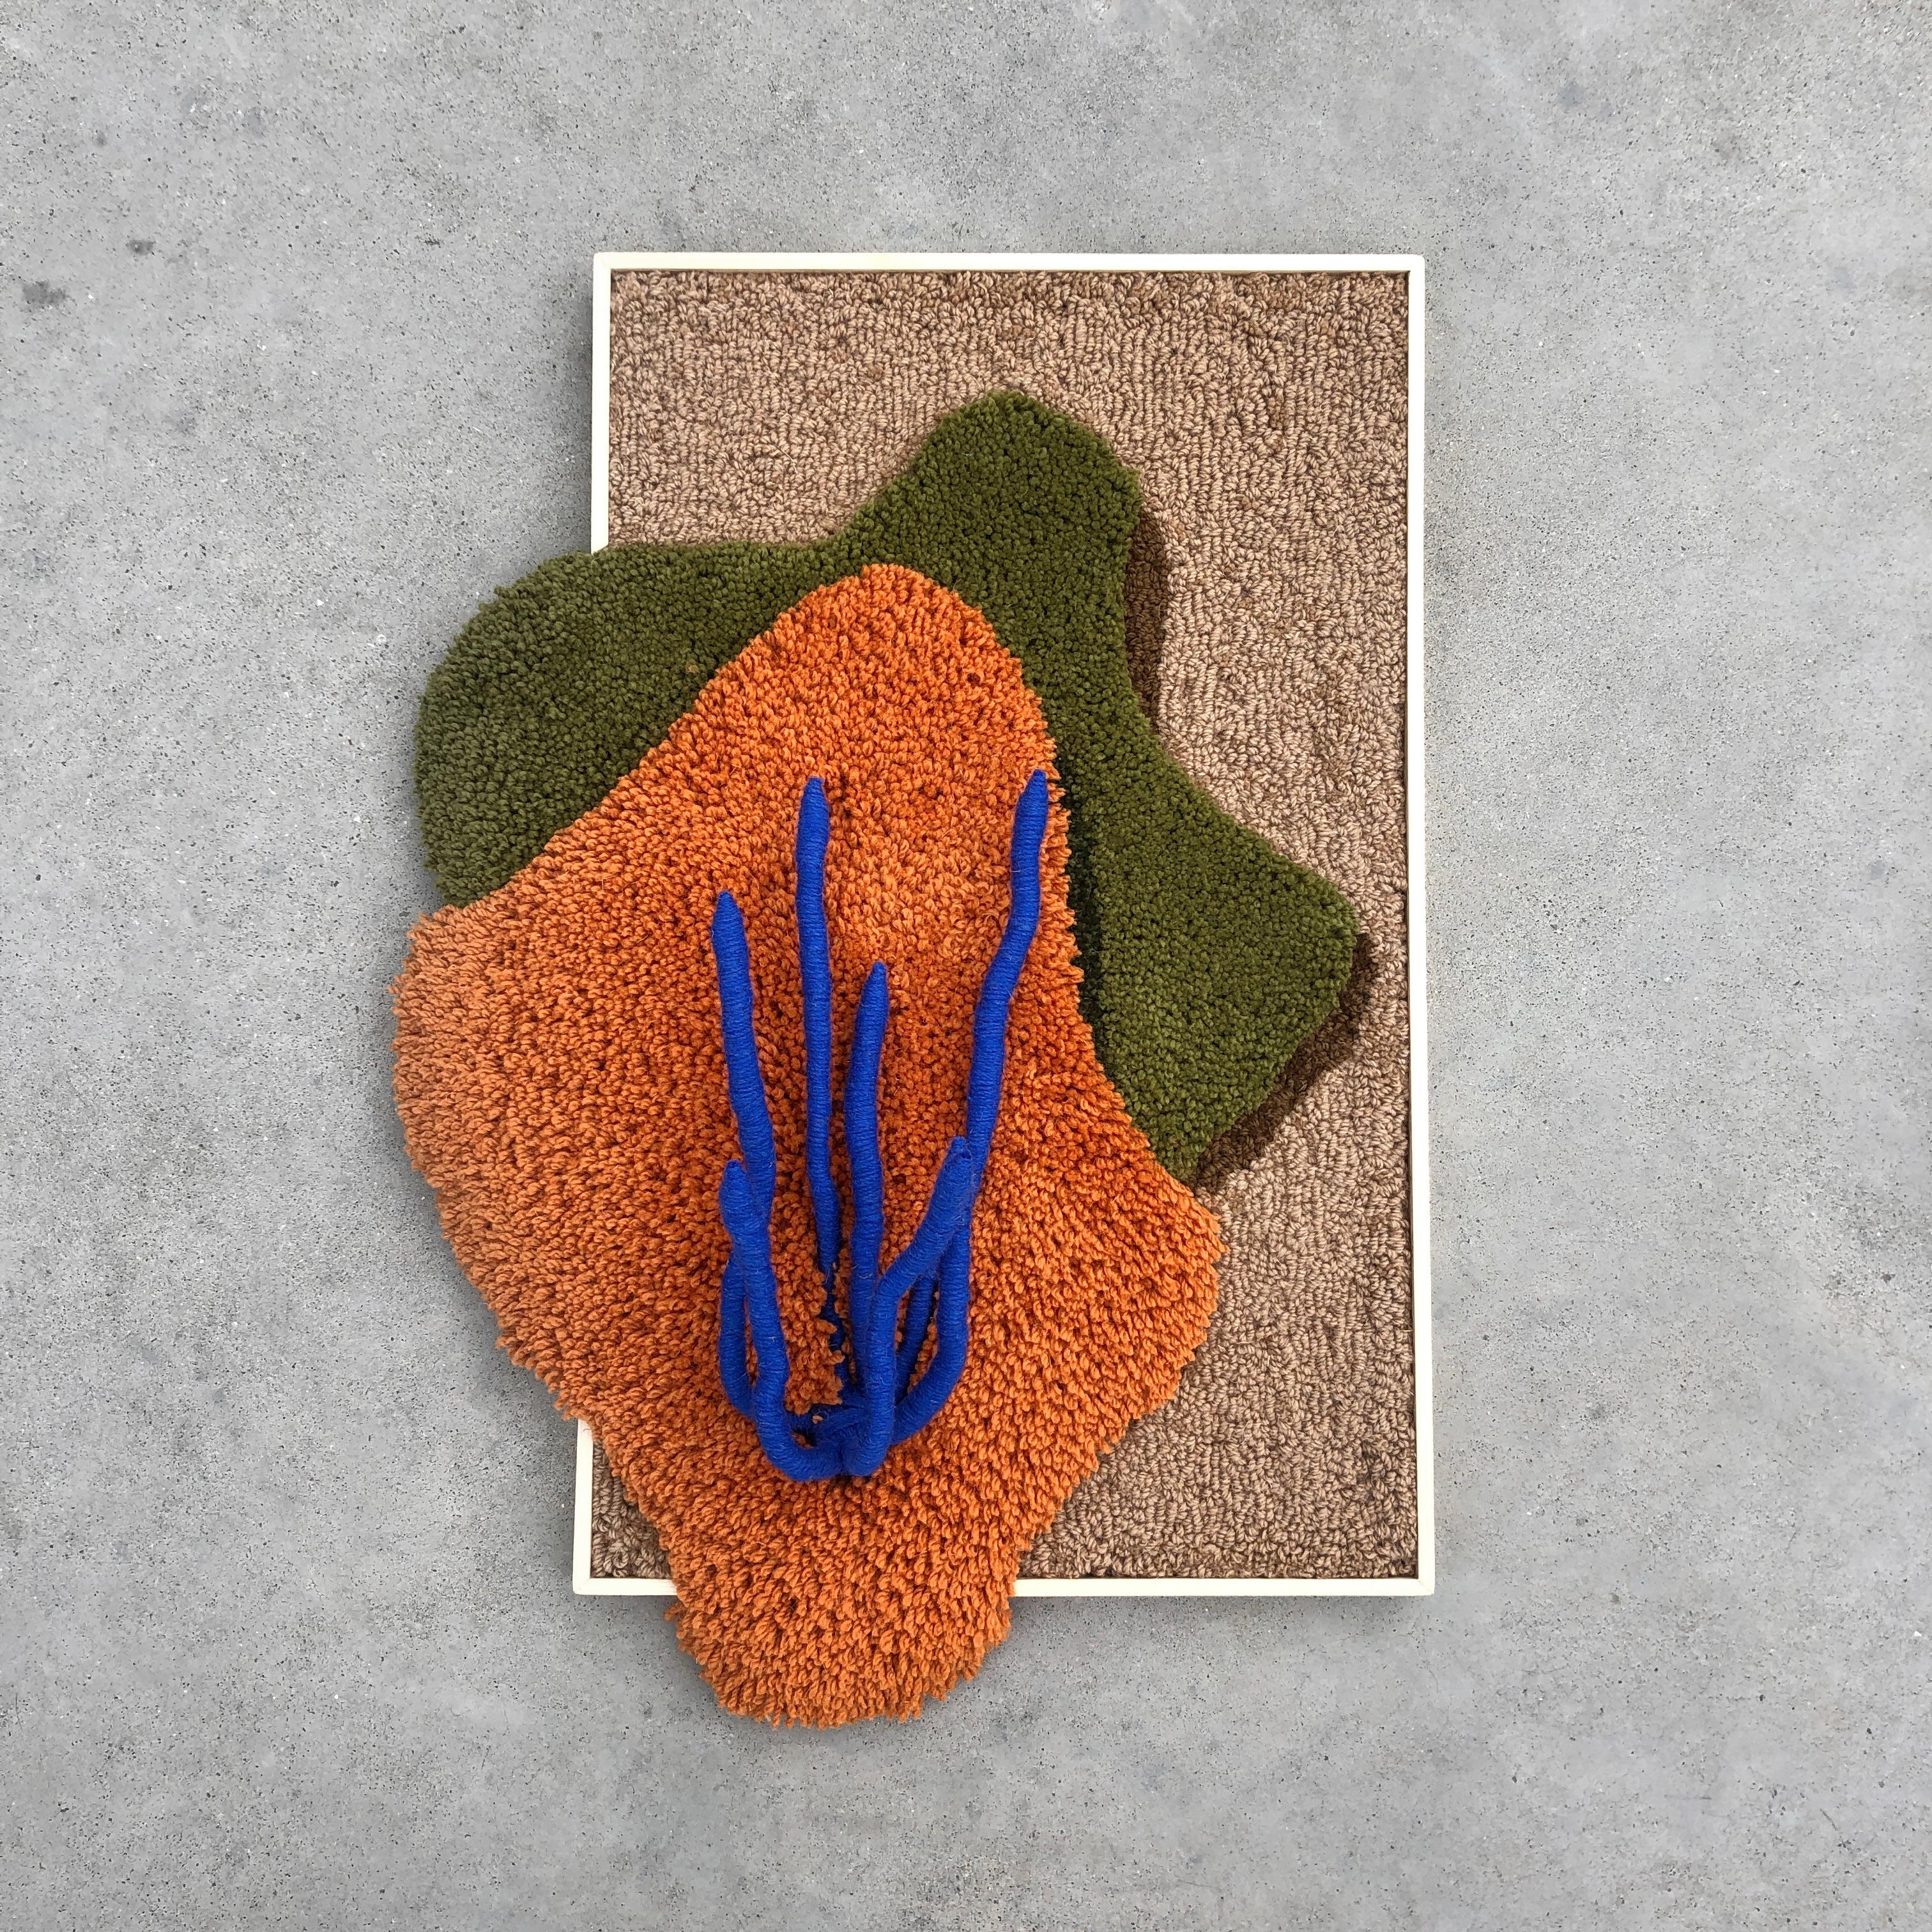 ANTHOZOA AZUL Tapestry is handmade with 100% Portuguese wool yarn, using tufting gun, carving and textile sculpture techniques. It has a 3D sculpture element and the pine frame, as part of the composition, is designed and produced by the studio.